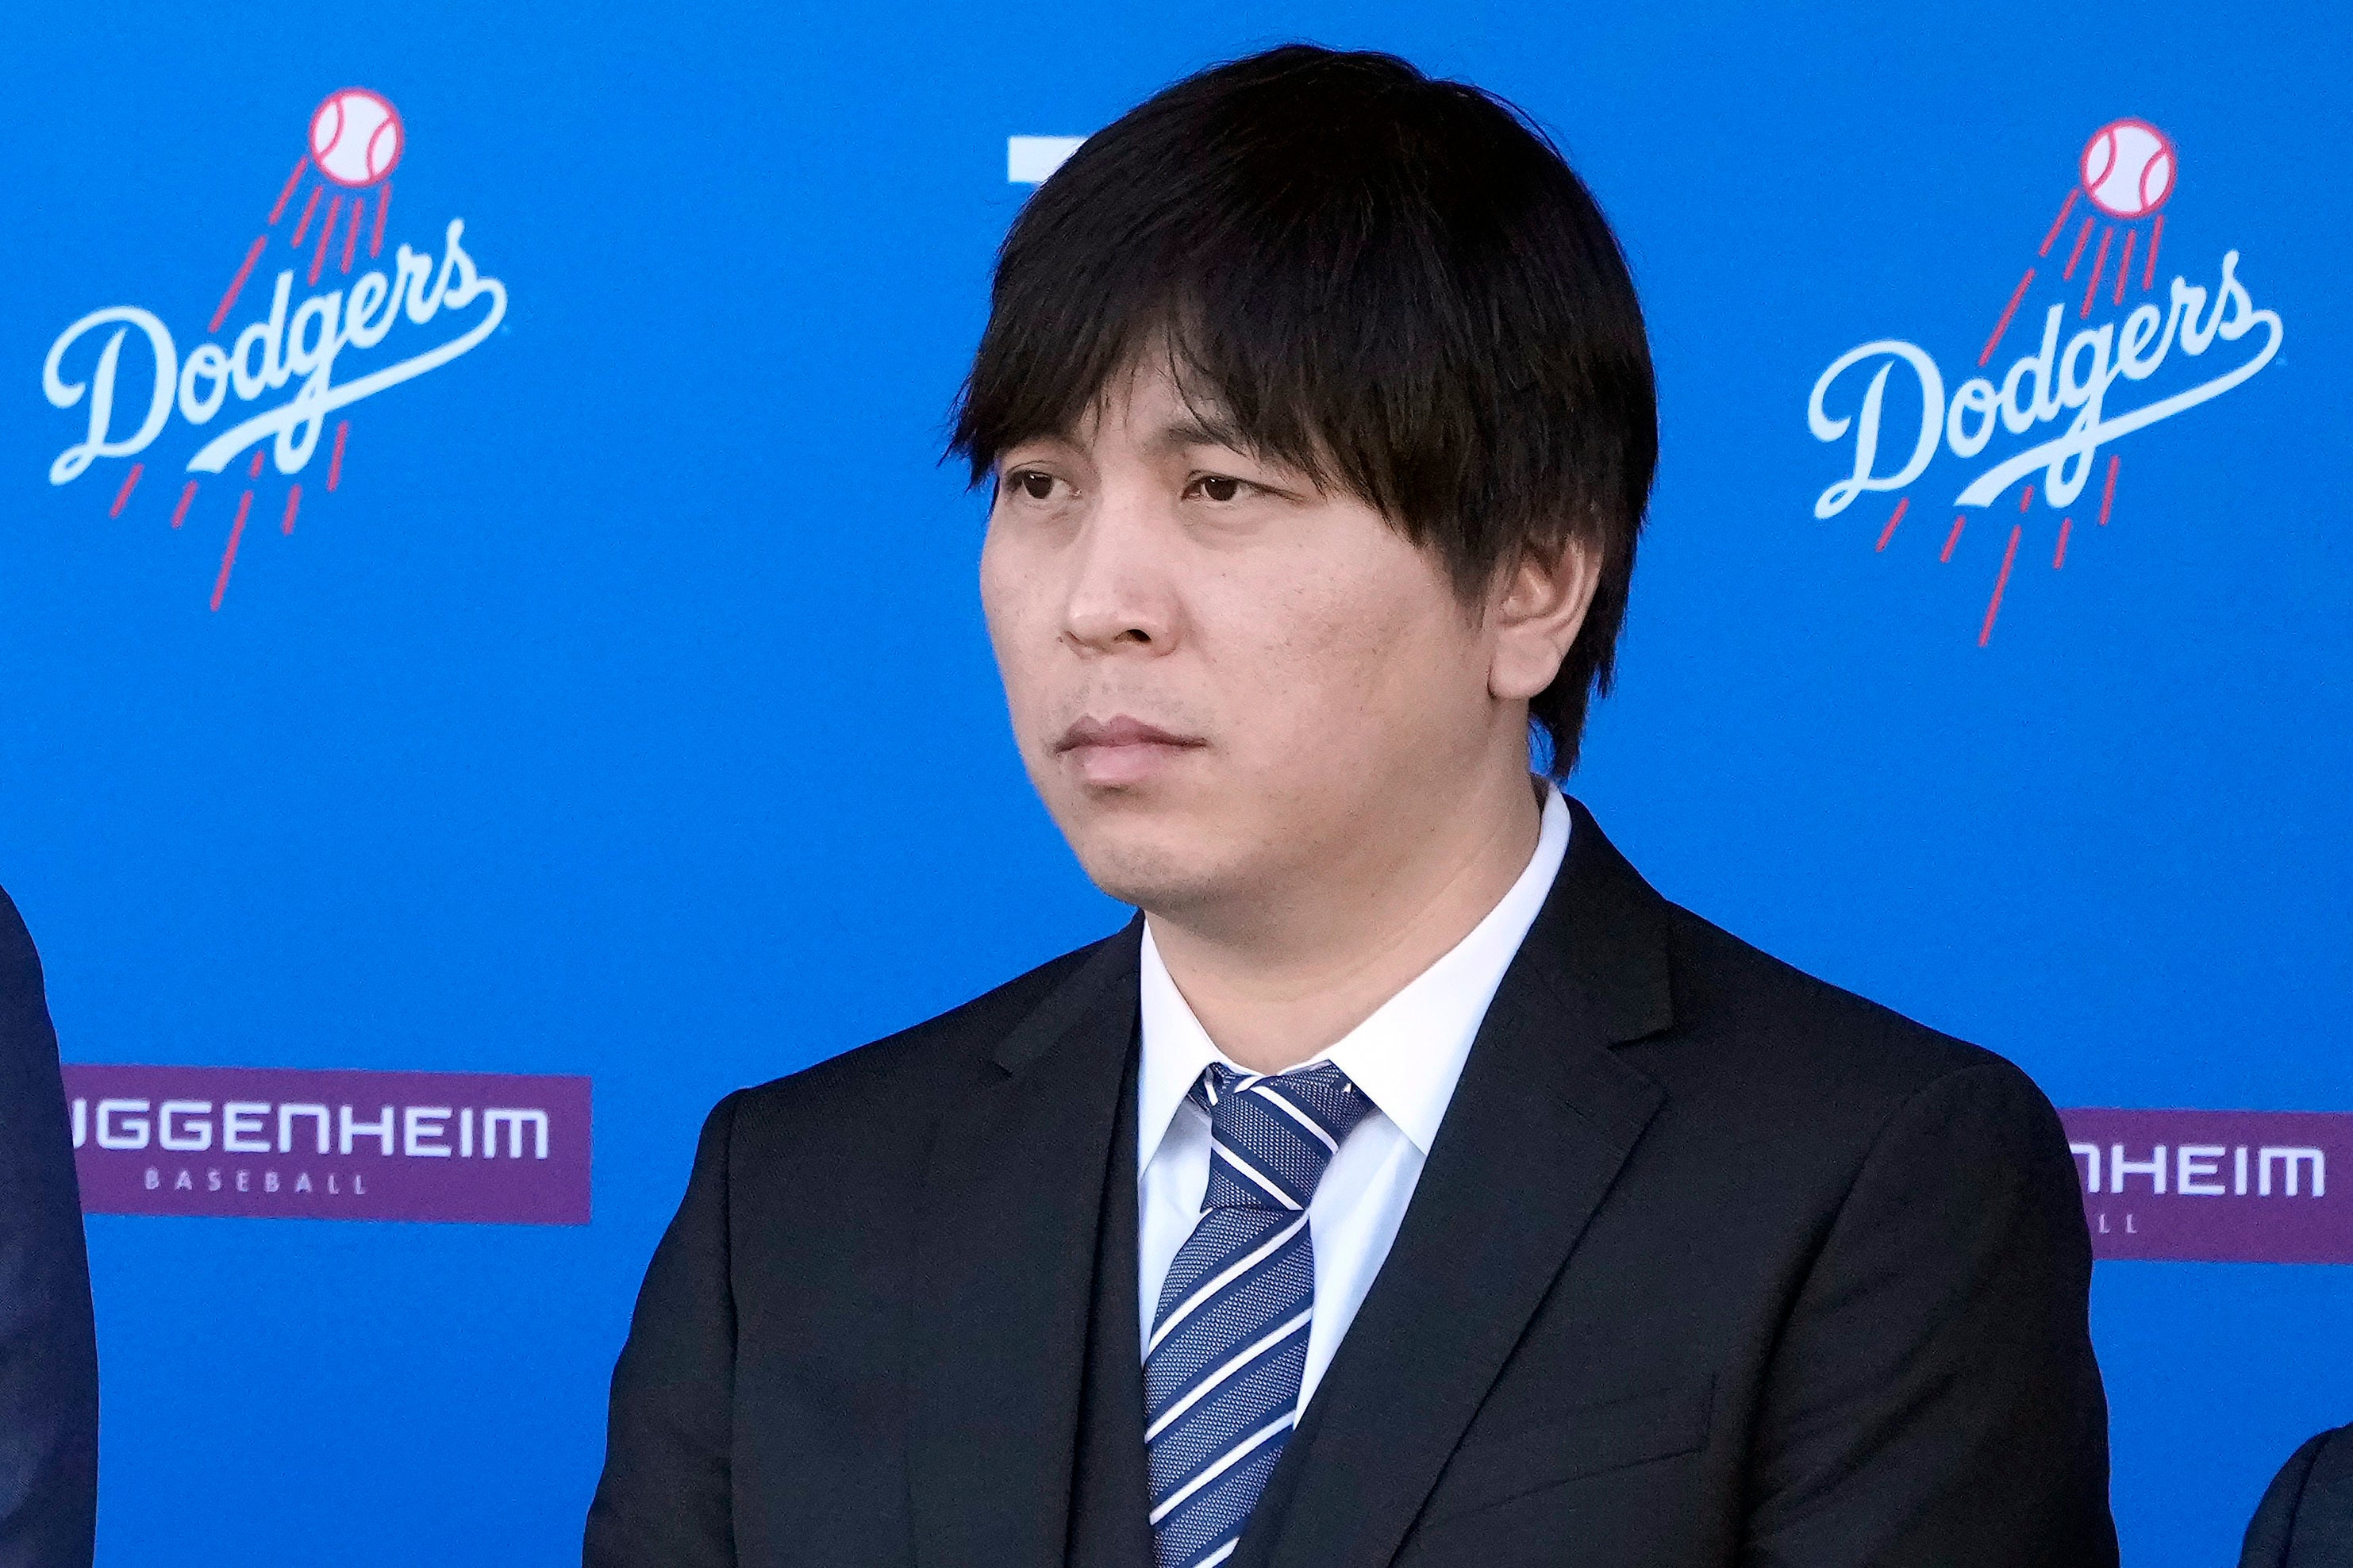 dodgers star shohei ohtani’s interpreter pleads guilty to transferring $17m from player’s bank account